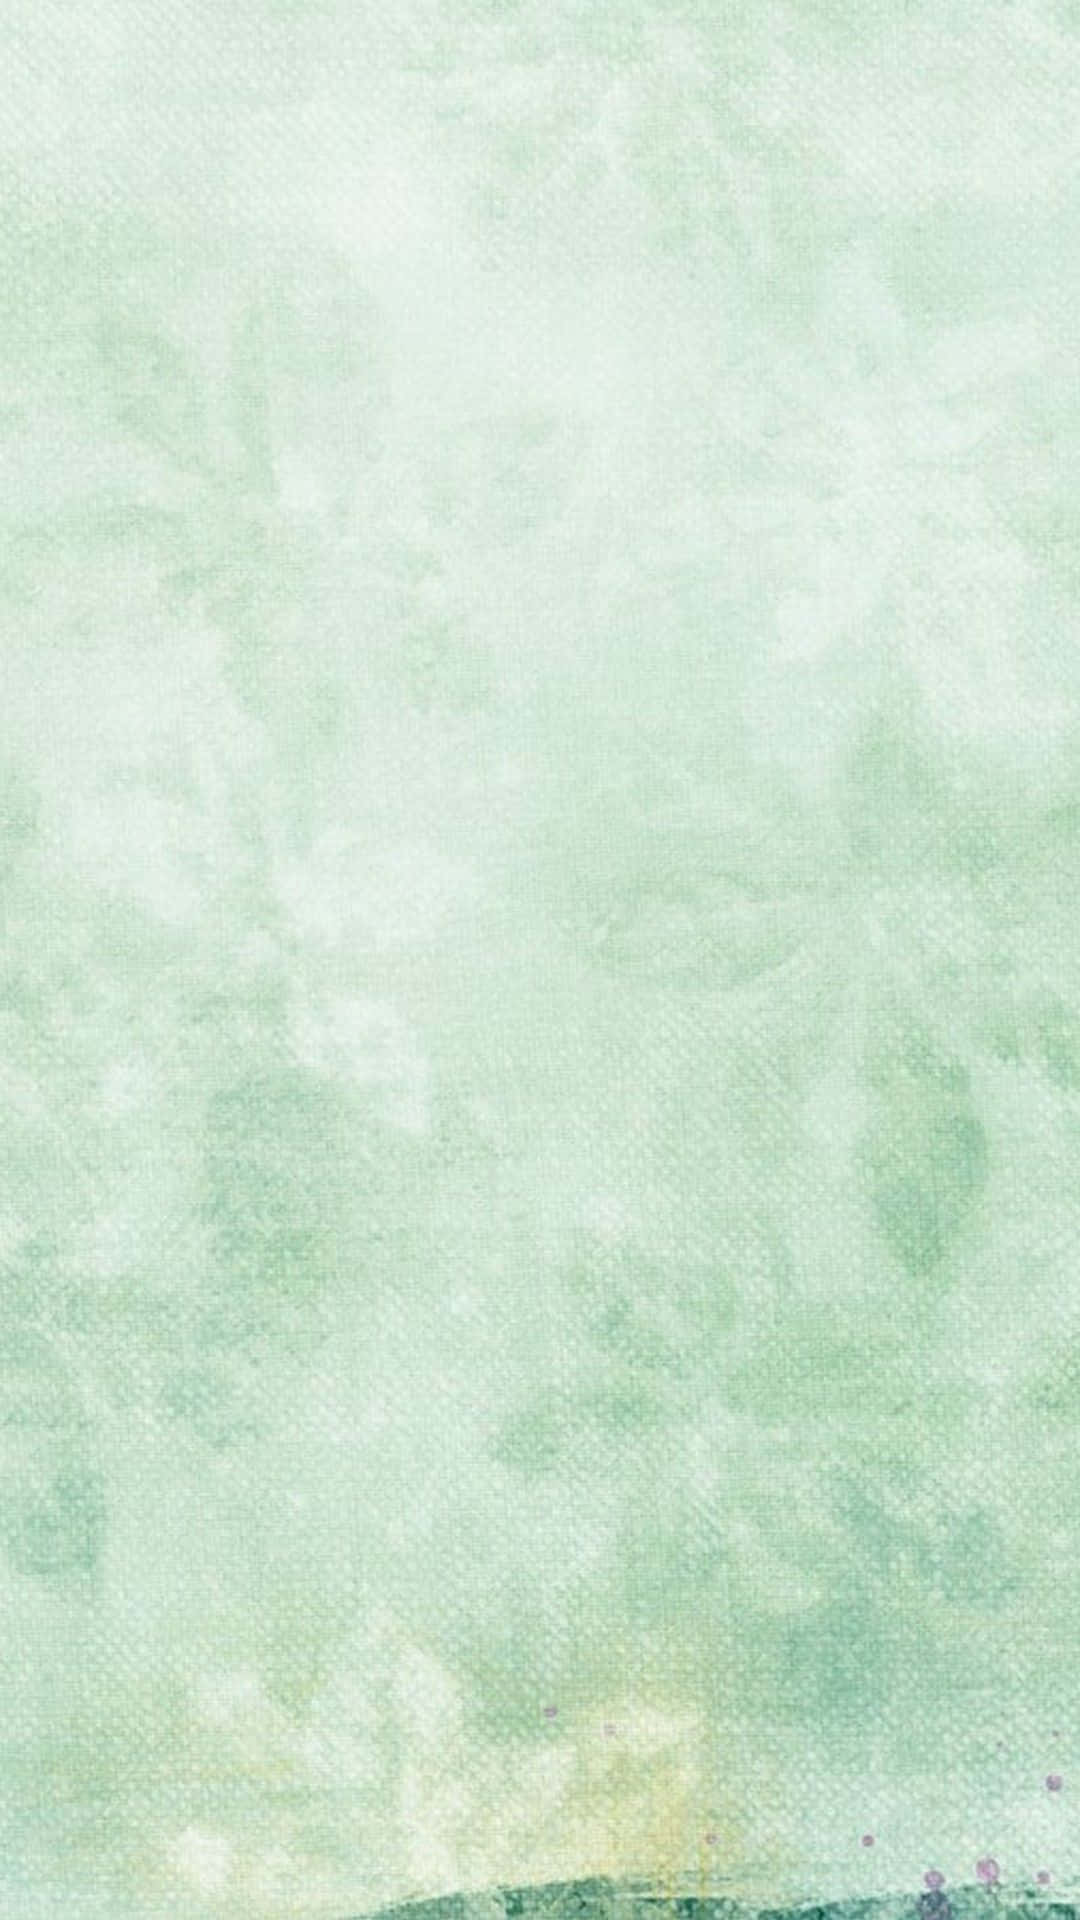 40 Mint Green Wallpaper Backgrounds For Iphone  Green wallpaper phone Mint  green wallpaper Iphone wallpaper green